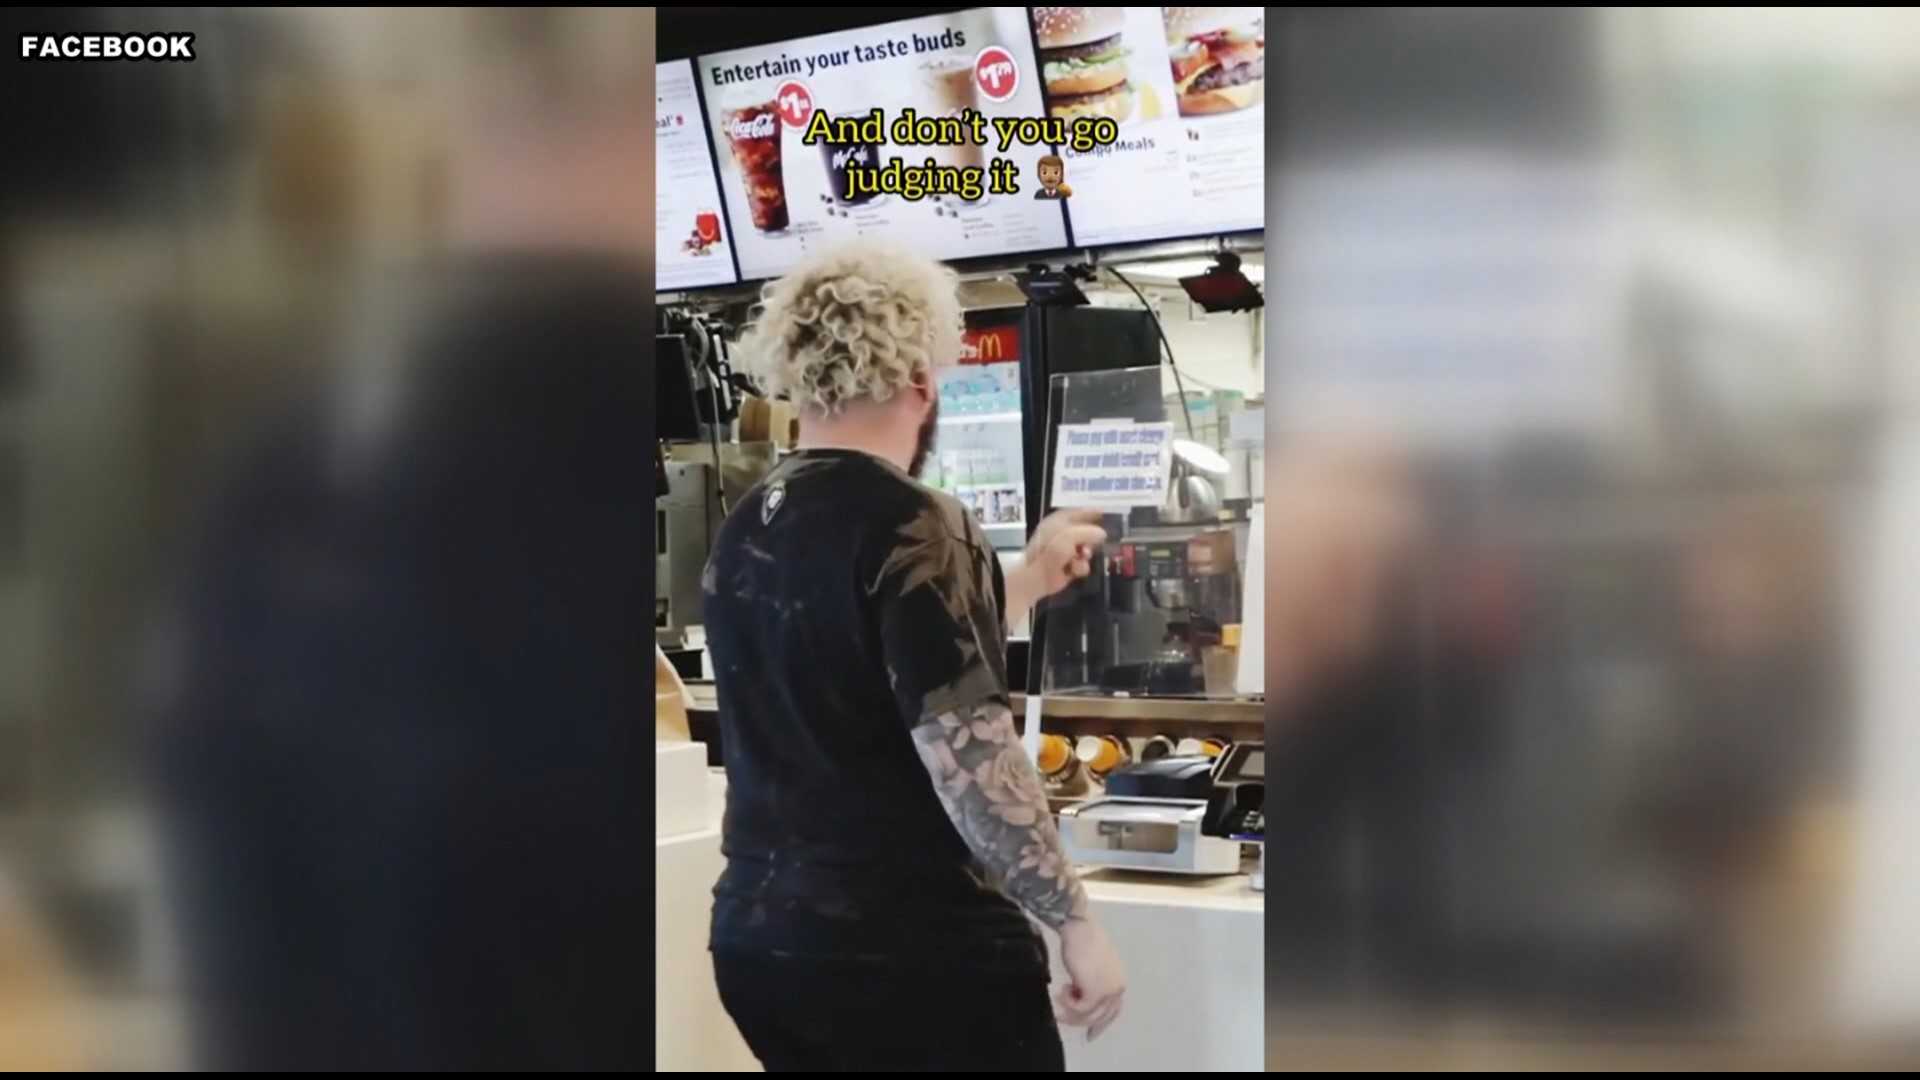 Newington, Conn. native Michael Minelli serenaded the staff at a local Mcdonald's. He sat down with Symphonie Privett to discuss his new viral fame.